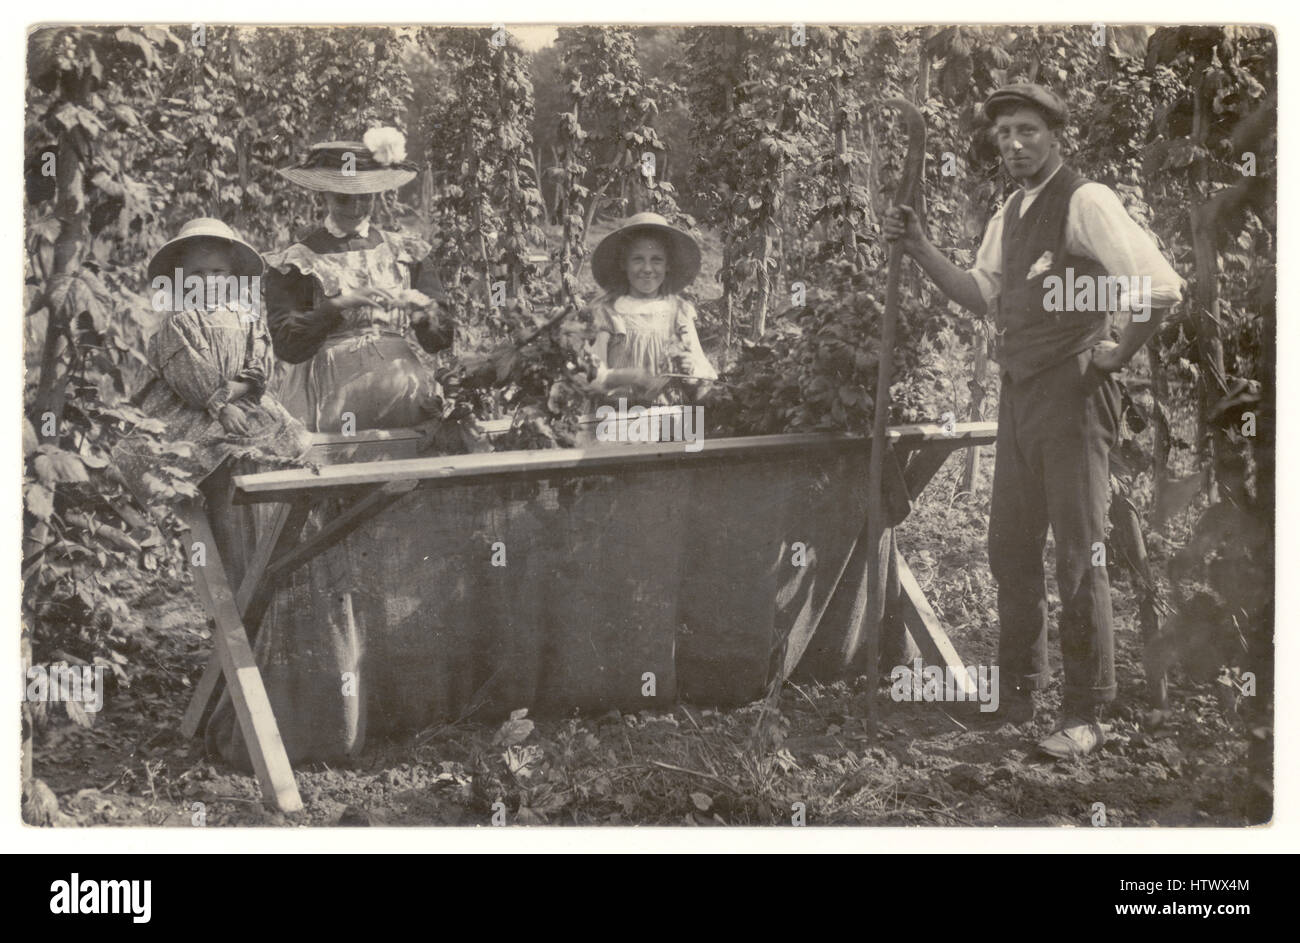 Original Edwardian 1900's postcard of family enjoying themselves on a hop picking working holiday, posing next to a hop bin, Victorian hop pickers,  U.K. circa 1905 Stock Photo